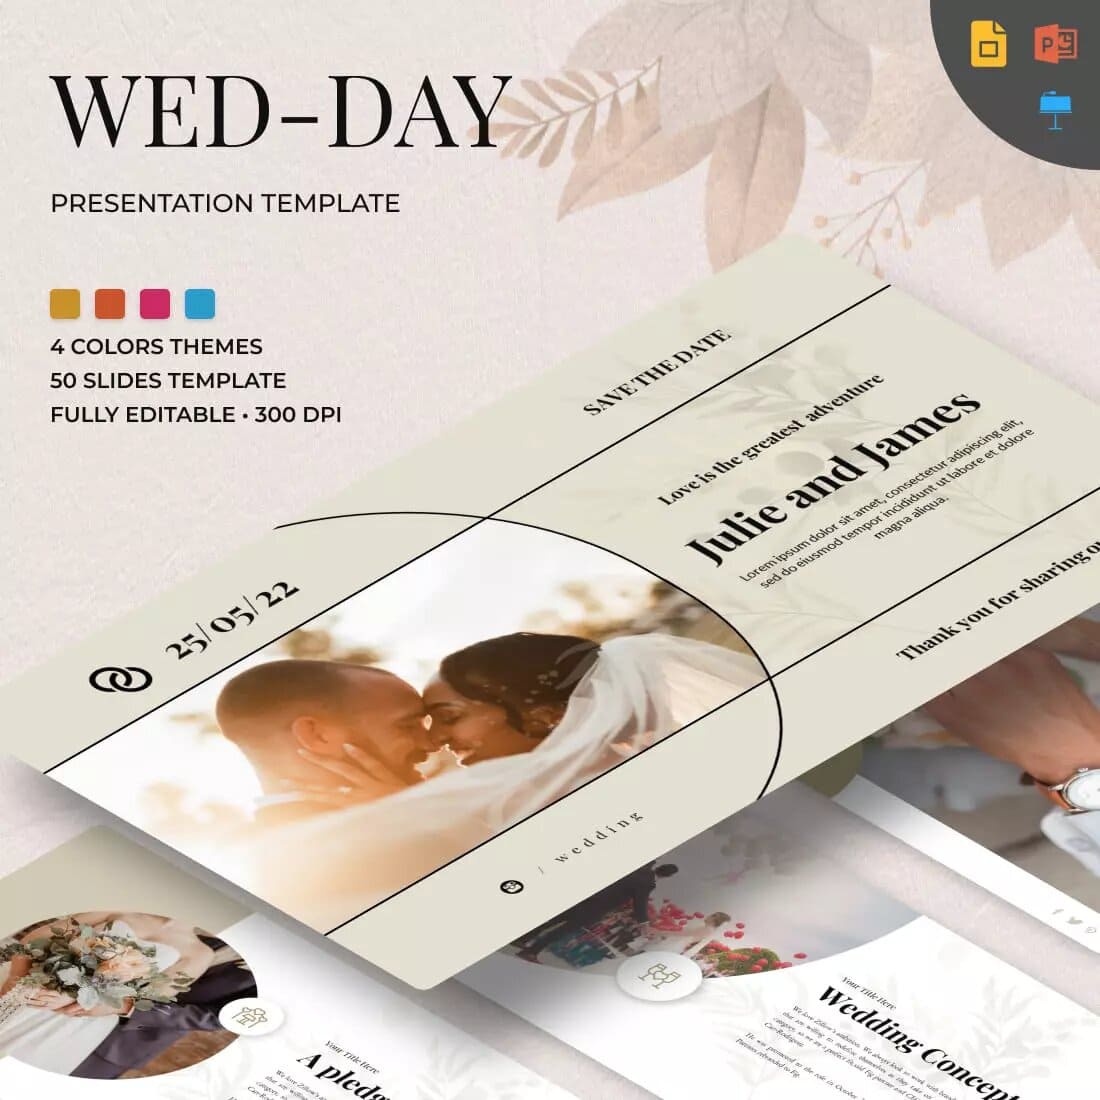 Wedday Presentation Template Preview 4.